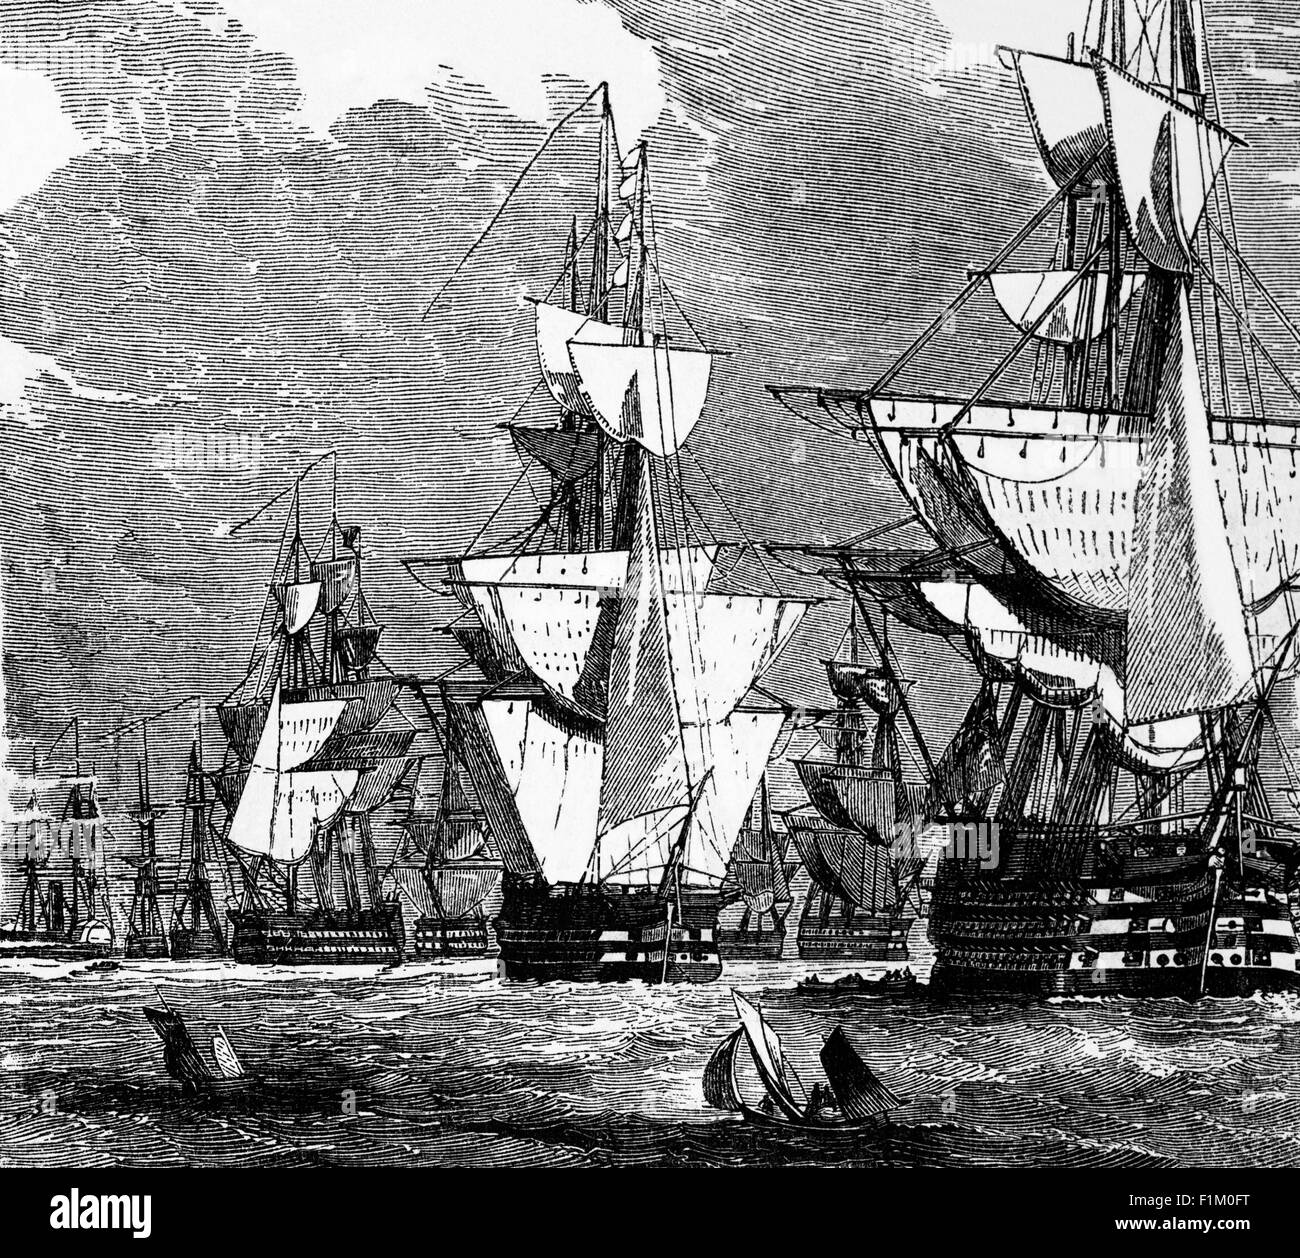 A line of British 'ships of the line', a type of naval warship in 1854. Constructed during the Age of Sail  they were designed for the naval tactic known as the line of battle, in which two columns of opposing warships maneuver to volley fire with the cannons along their broadsides. In conflicts where opposing ships were both able to fire from their broadsides, the opponent with more cannons firing and firepower had an advantage. Stock Photo